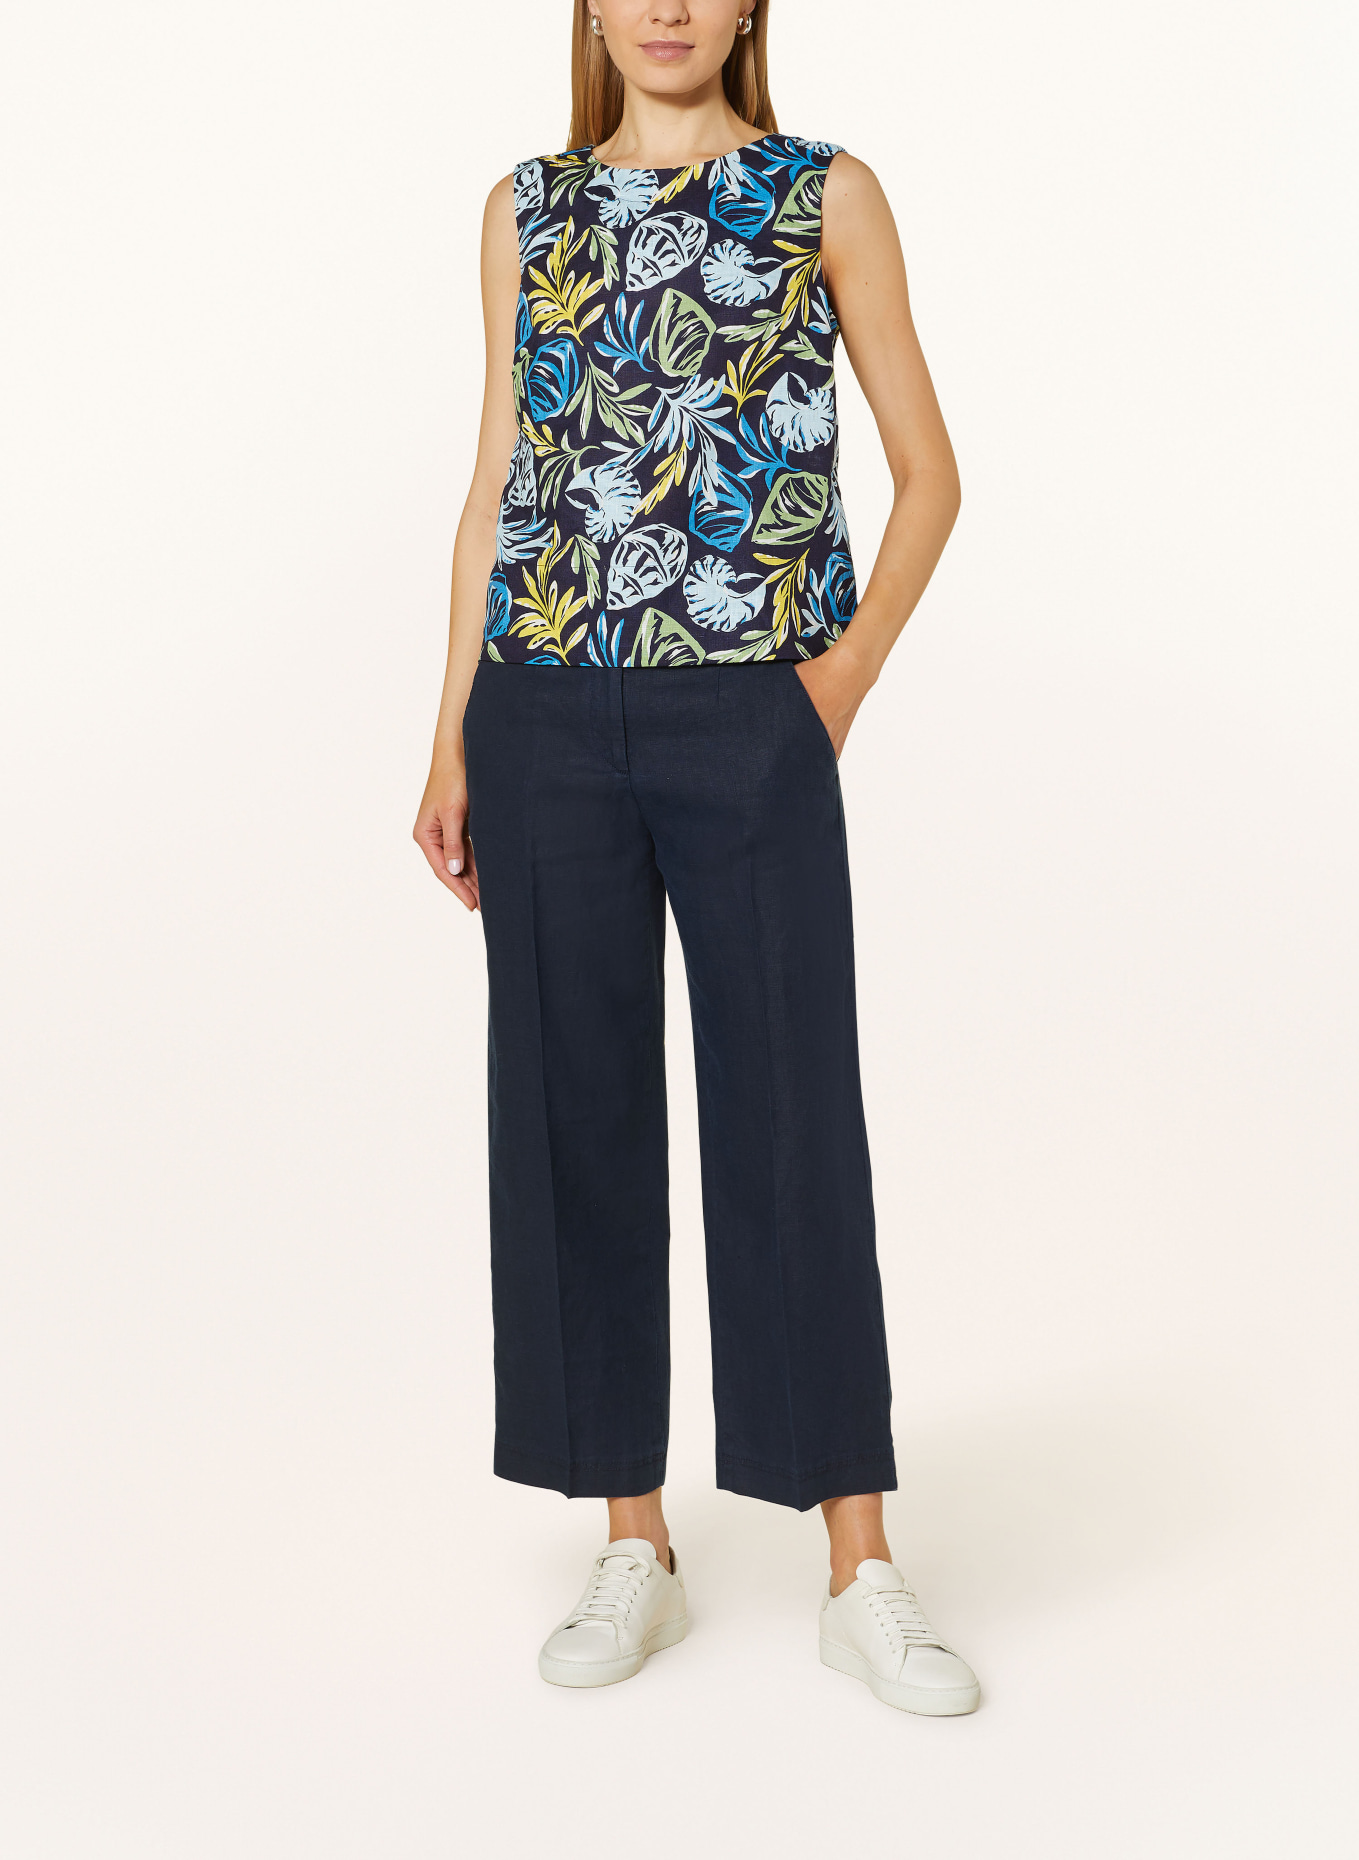 HOBBS Blouse top MALINDI in linen, Color: BLACK/ BLUE/ YELLOW (Image 2)